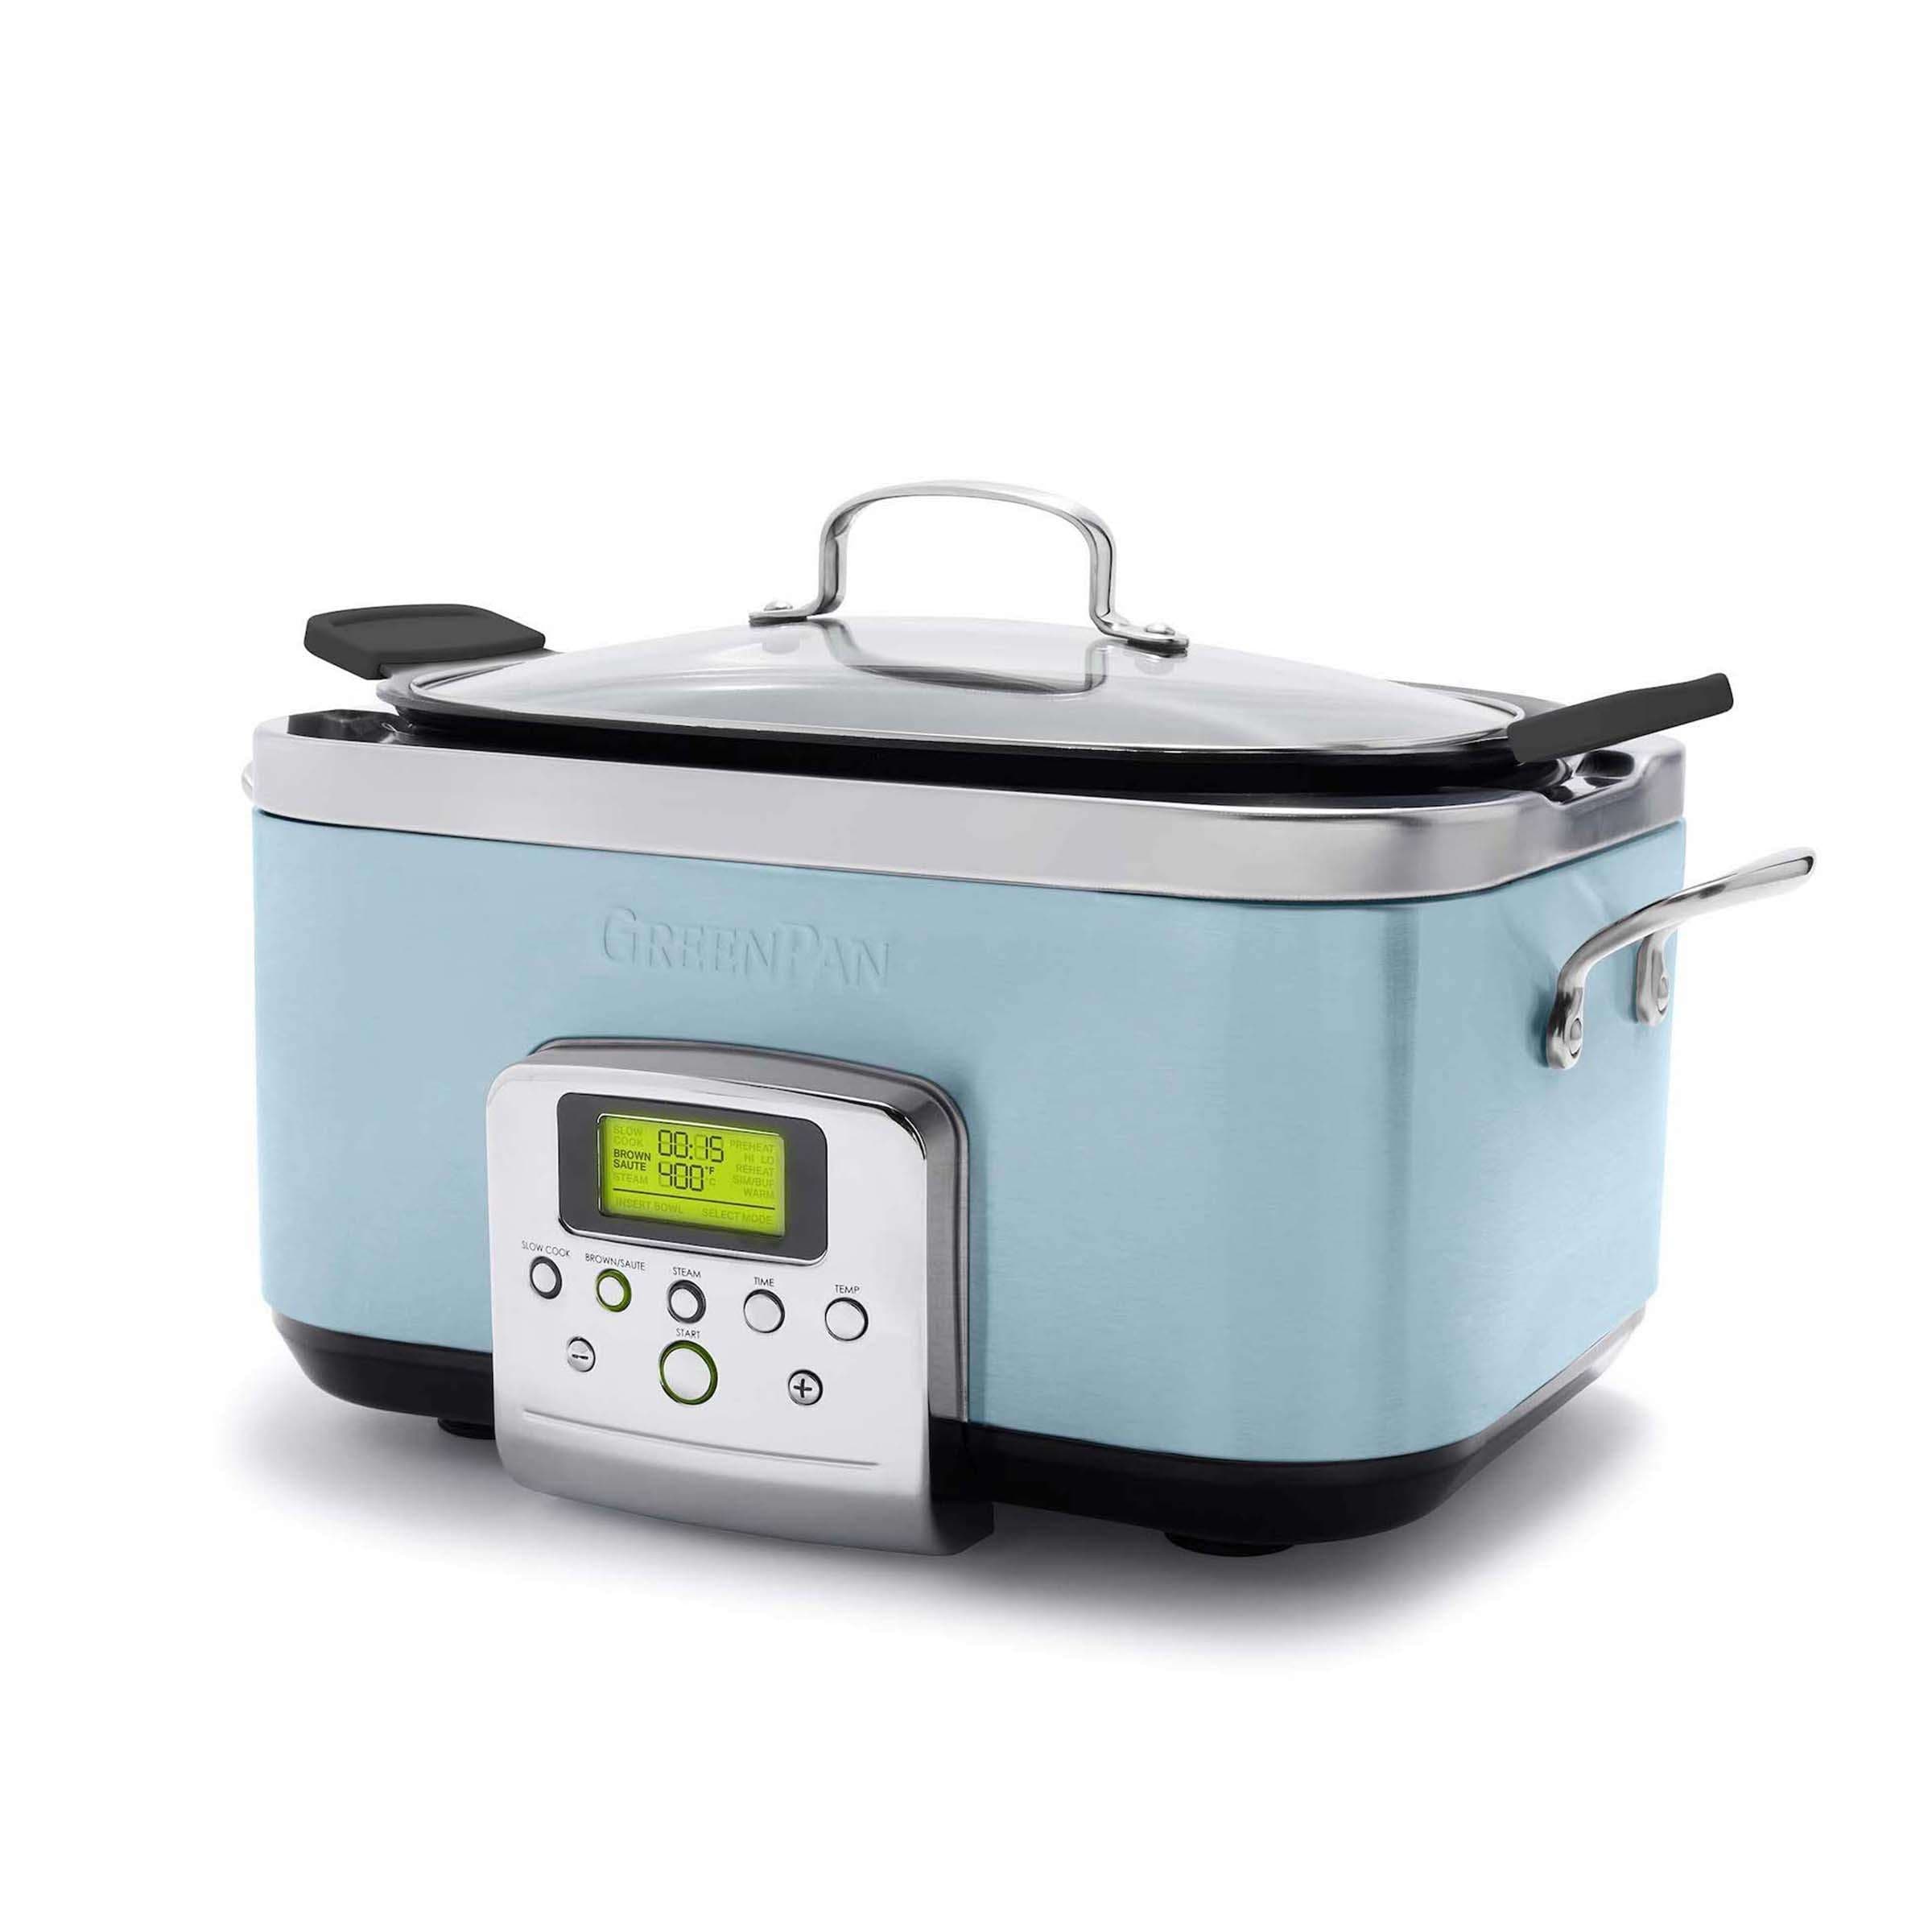 https://ak1.ostkcdn.com/images/products/is/images/direct/6749bc4924b82d46e4b4fe1caf6eb6d36c1a8f8f/GreenPan-Elite-6-Quart-Slow-Cooker.jpg